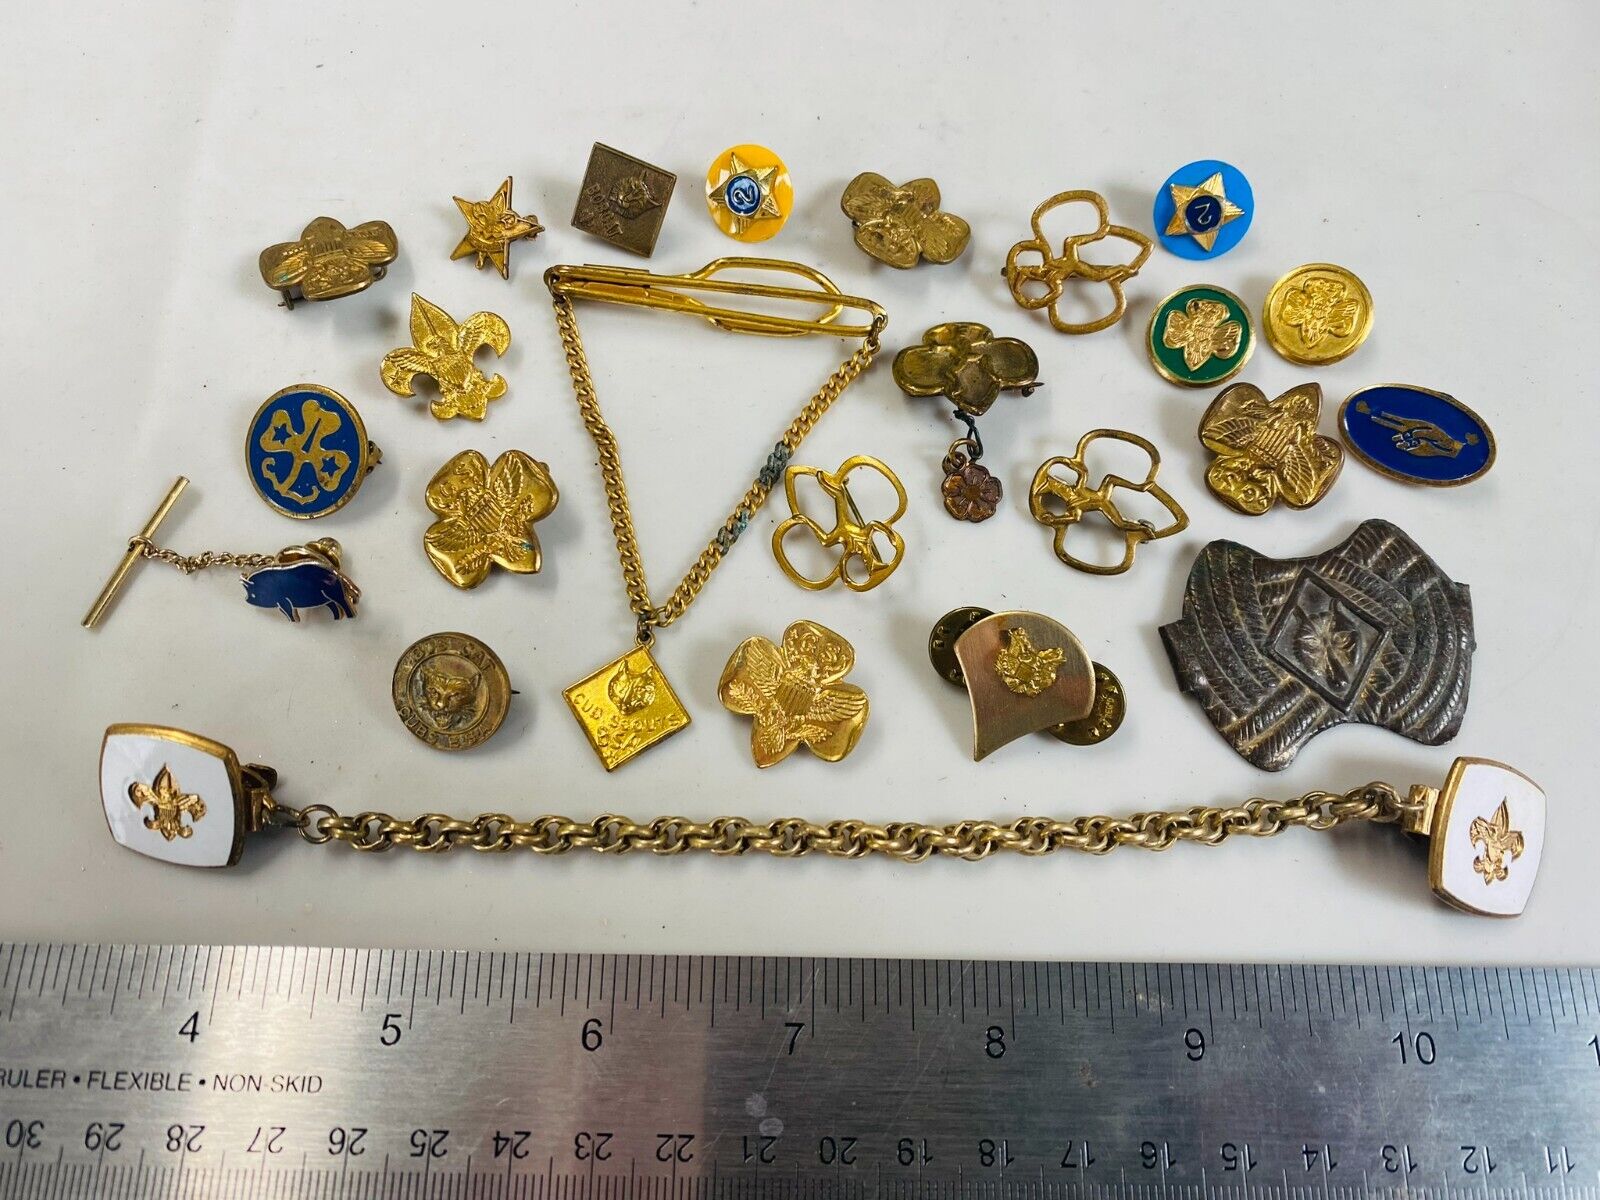 Collection Lot Vintage + Antique Fraternal Scouting Jewelry and Memorabilia - Q2